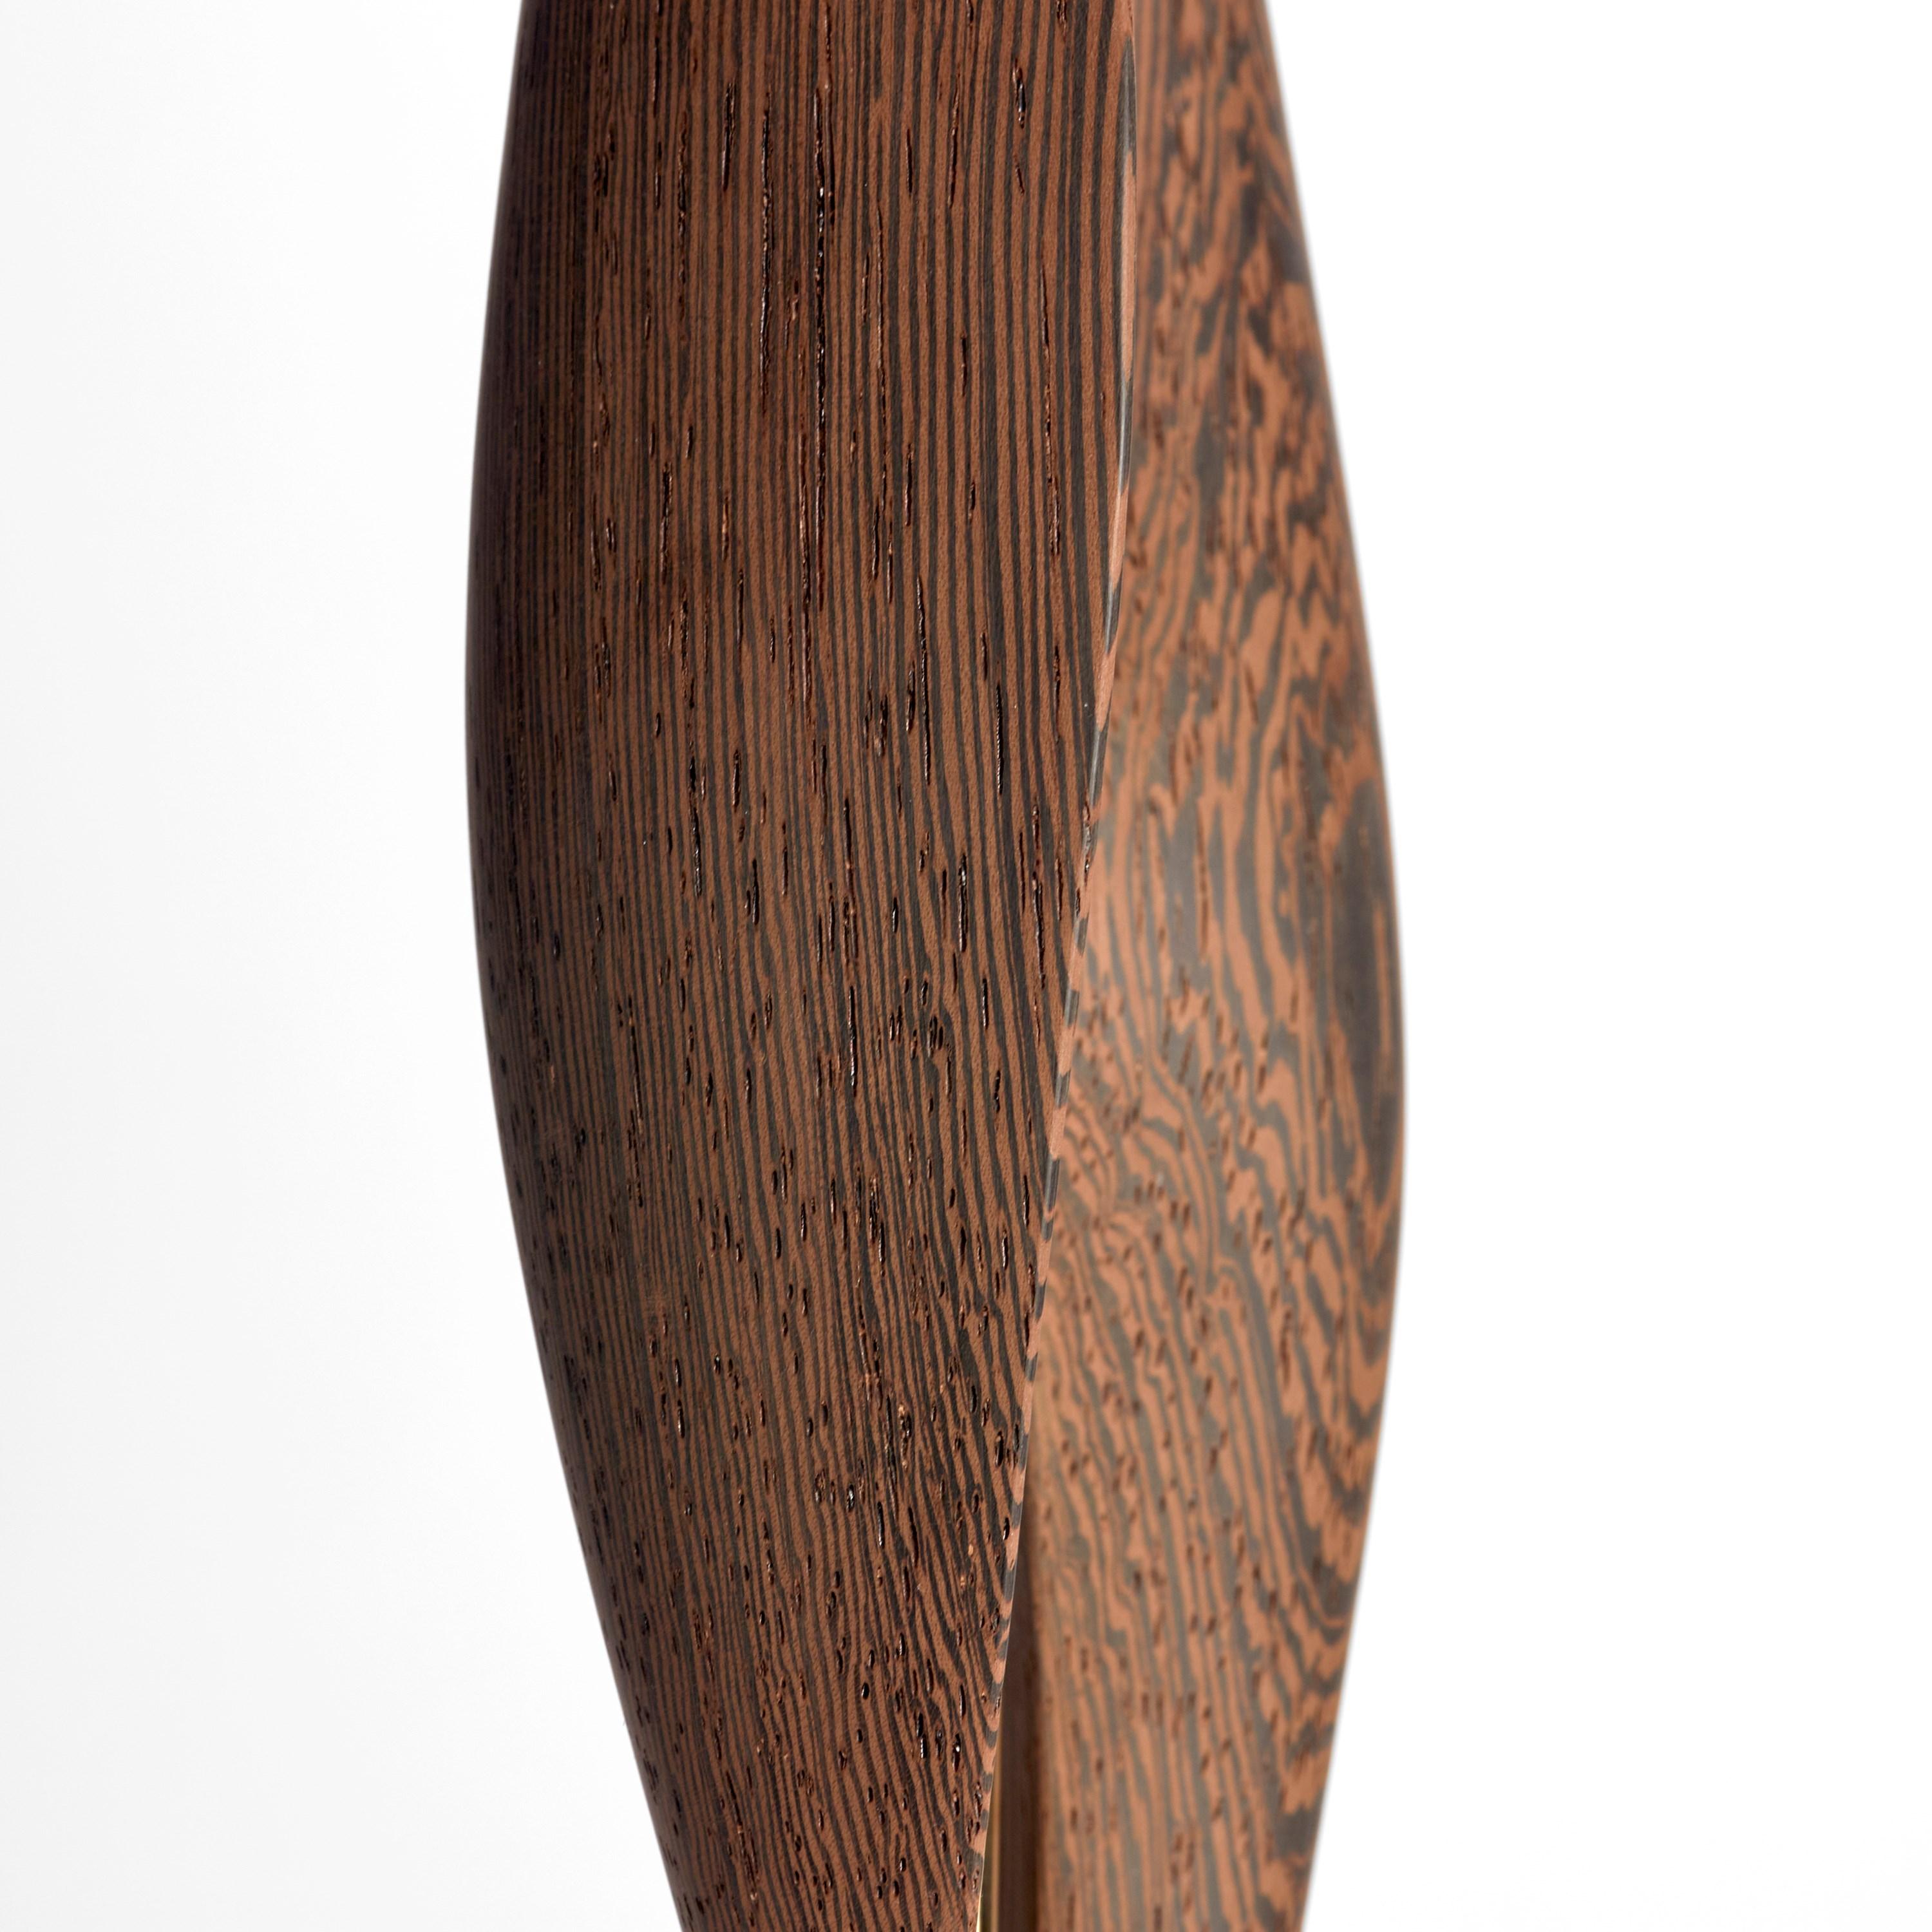 Flow Petit No 19, Wenge wood & gold mid-century inspired sculpture by Egeværk In New Condition For Sale In London, GB